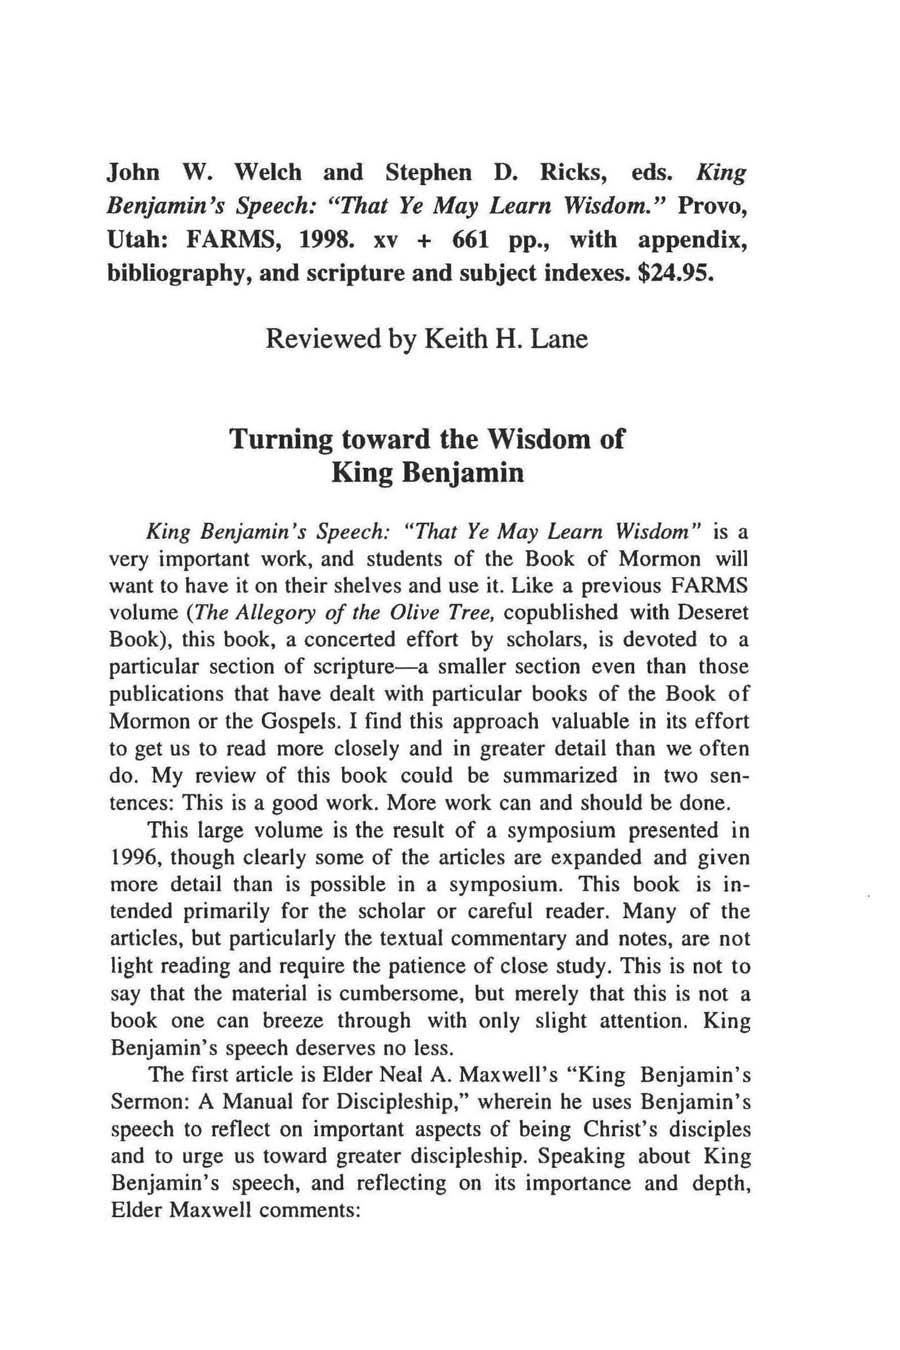 John W. Welch and Stephen D. Ricks, eds. King Benjamin's Speech: "That Ye May Learn Wisdom." Provo, Utah: FARMS, 1998. xv + 661 pp., with appendix, bibliography, and scripture and subject indexes.